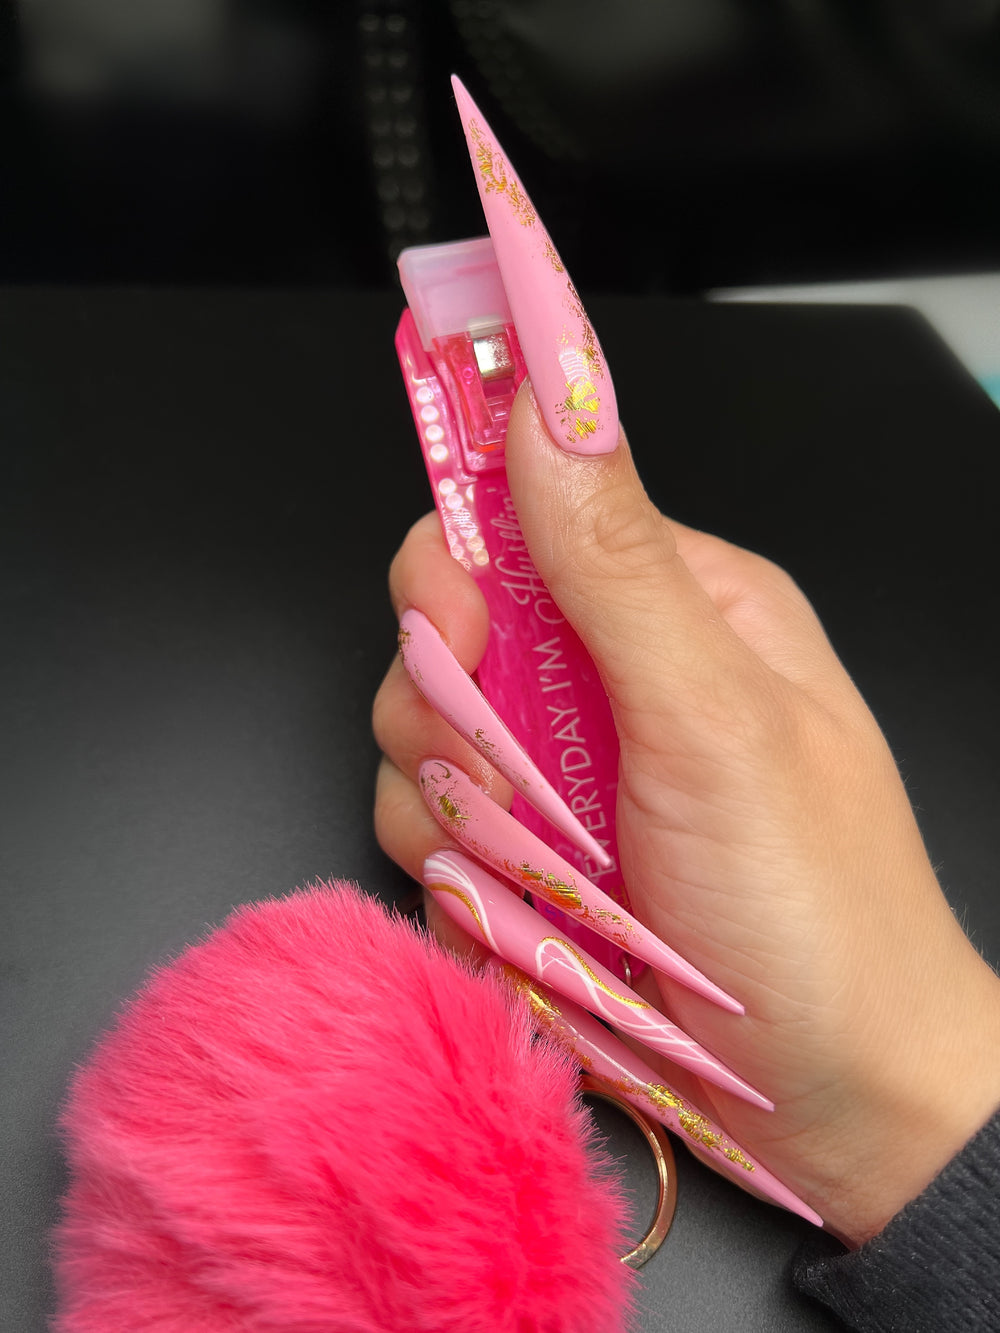 Long Nails Keychain Cards Nail Treatments Clip Key Rings Credit Card Puller  Pompom Keychains Acrylic Debit Bank Card Grabber From Fashion_show2017,  $1.64